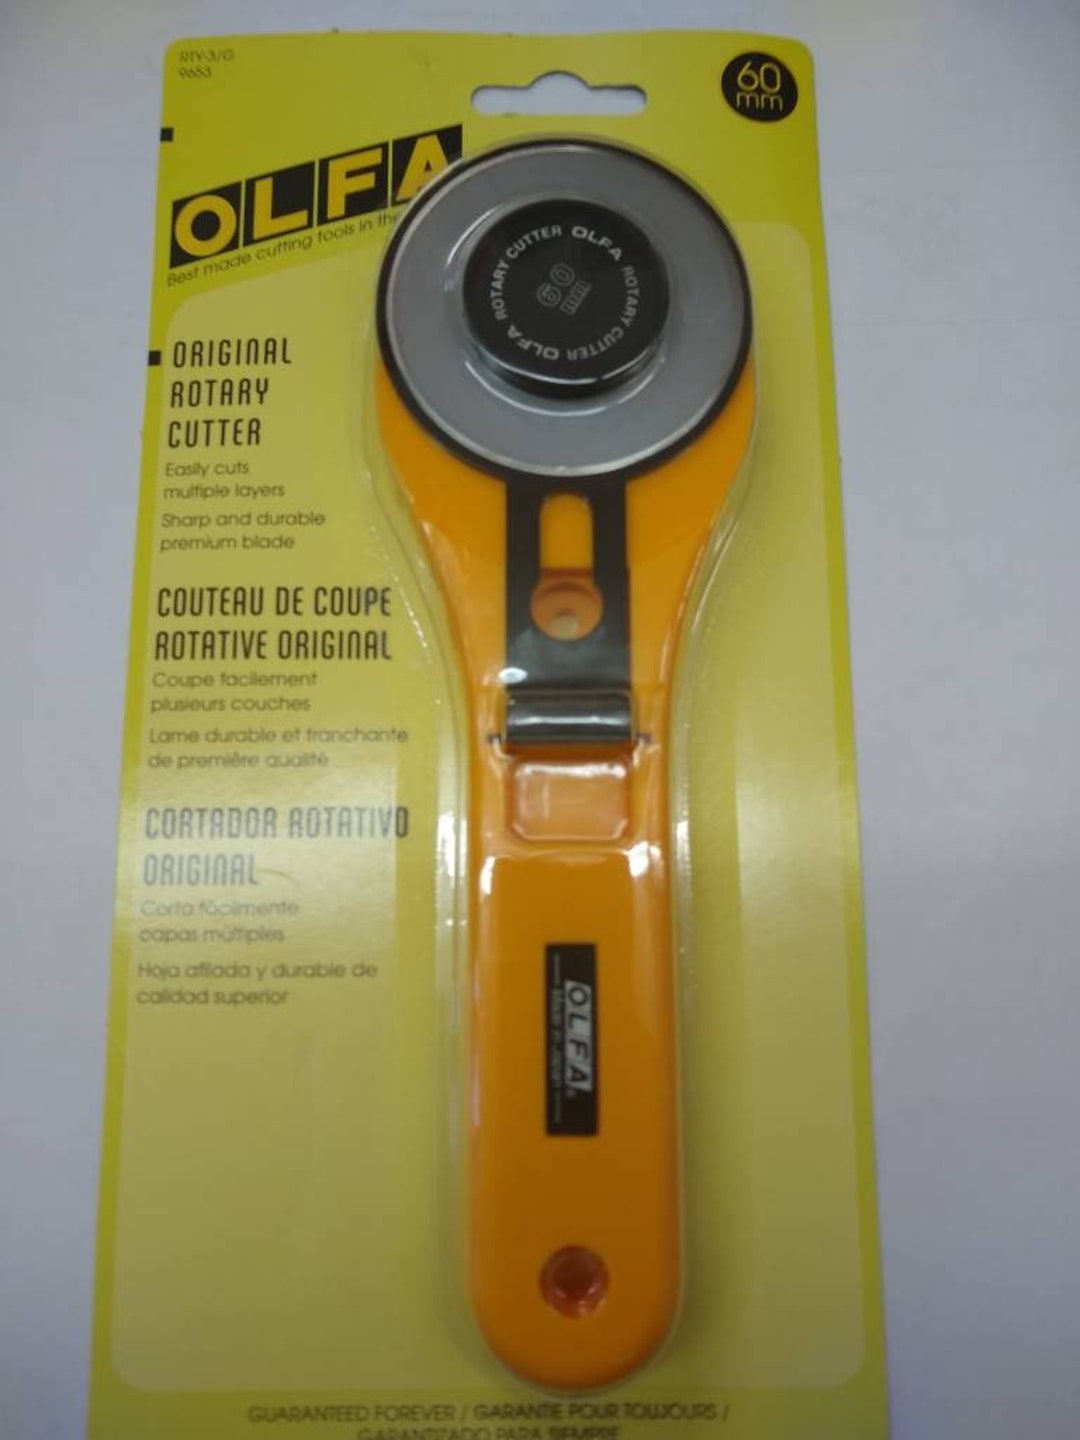 60mm 5ct Rotary Blade - Olfa 9458 – The Sewing Studio Fabric Superstore